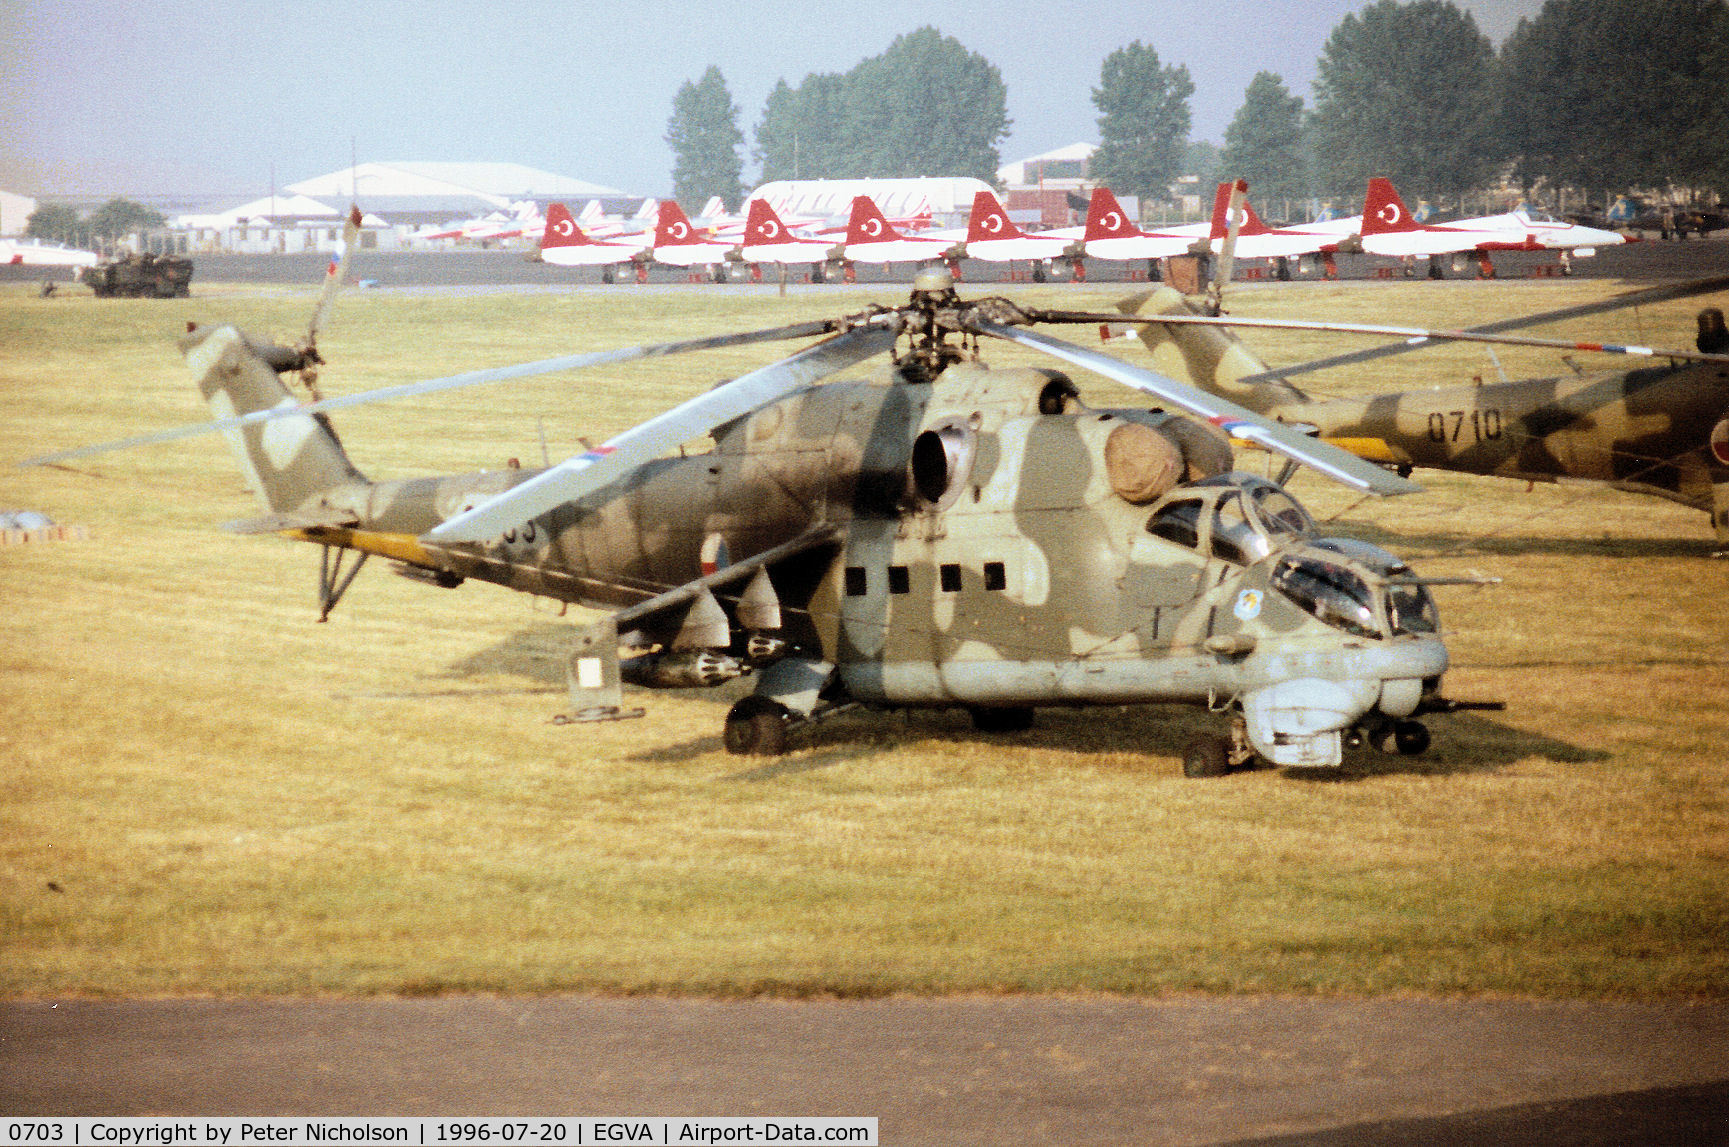 0703, Mil Mi-24V Hind E C/N 730703, Mi-24V Hind E helicopter gunship of 331 Squadron Czech Air Force on display at the 1996 Royal Intnl Air Tattoo at RAF Fairford.